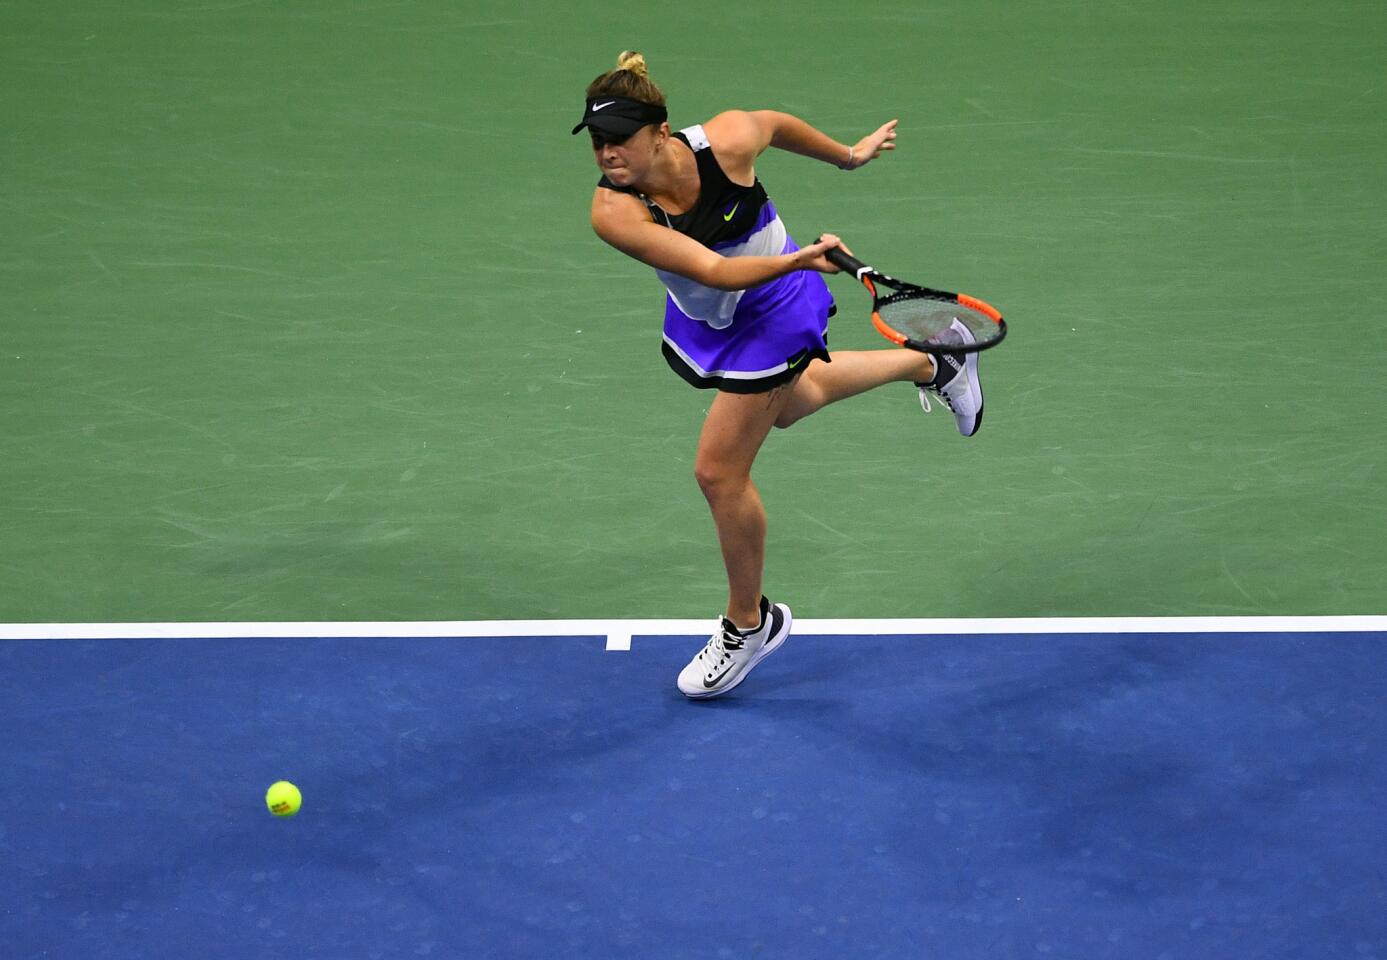 Elina Svitolina hits a return against Serena Williams during their Women's Singles semifinal match inside the Billie Jean King National Tennis Center in Queens on Sept. 5, 2019.